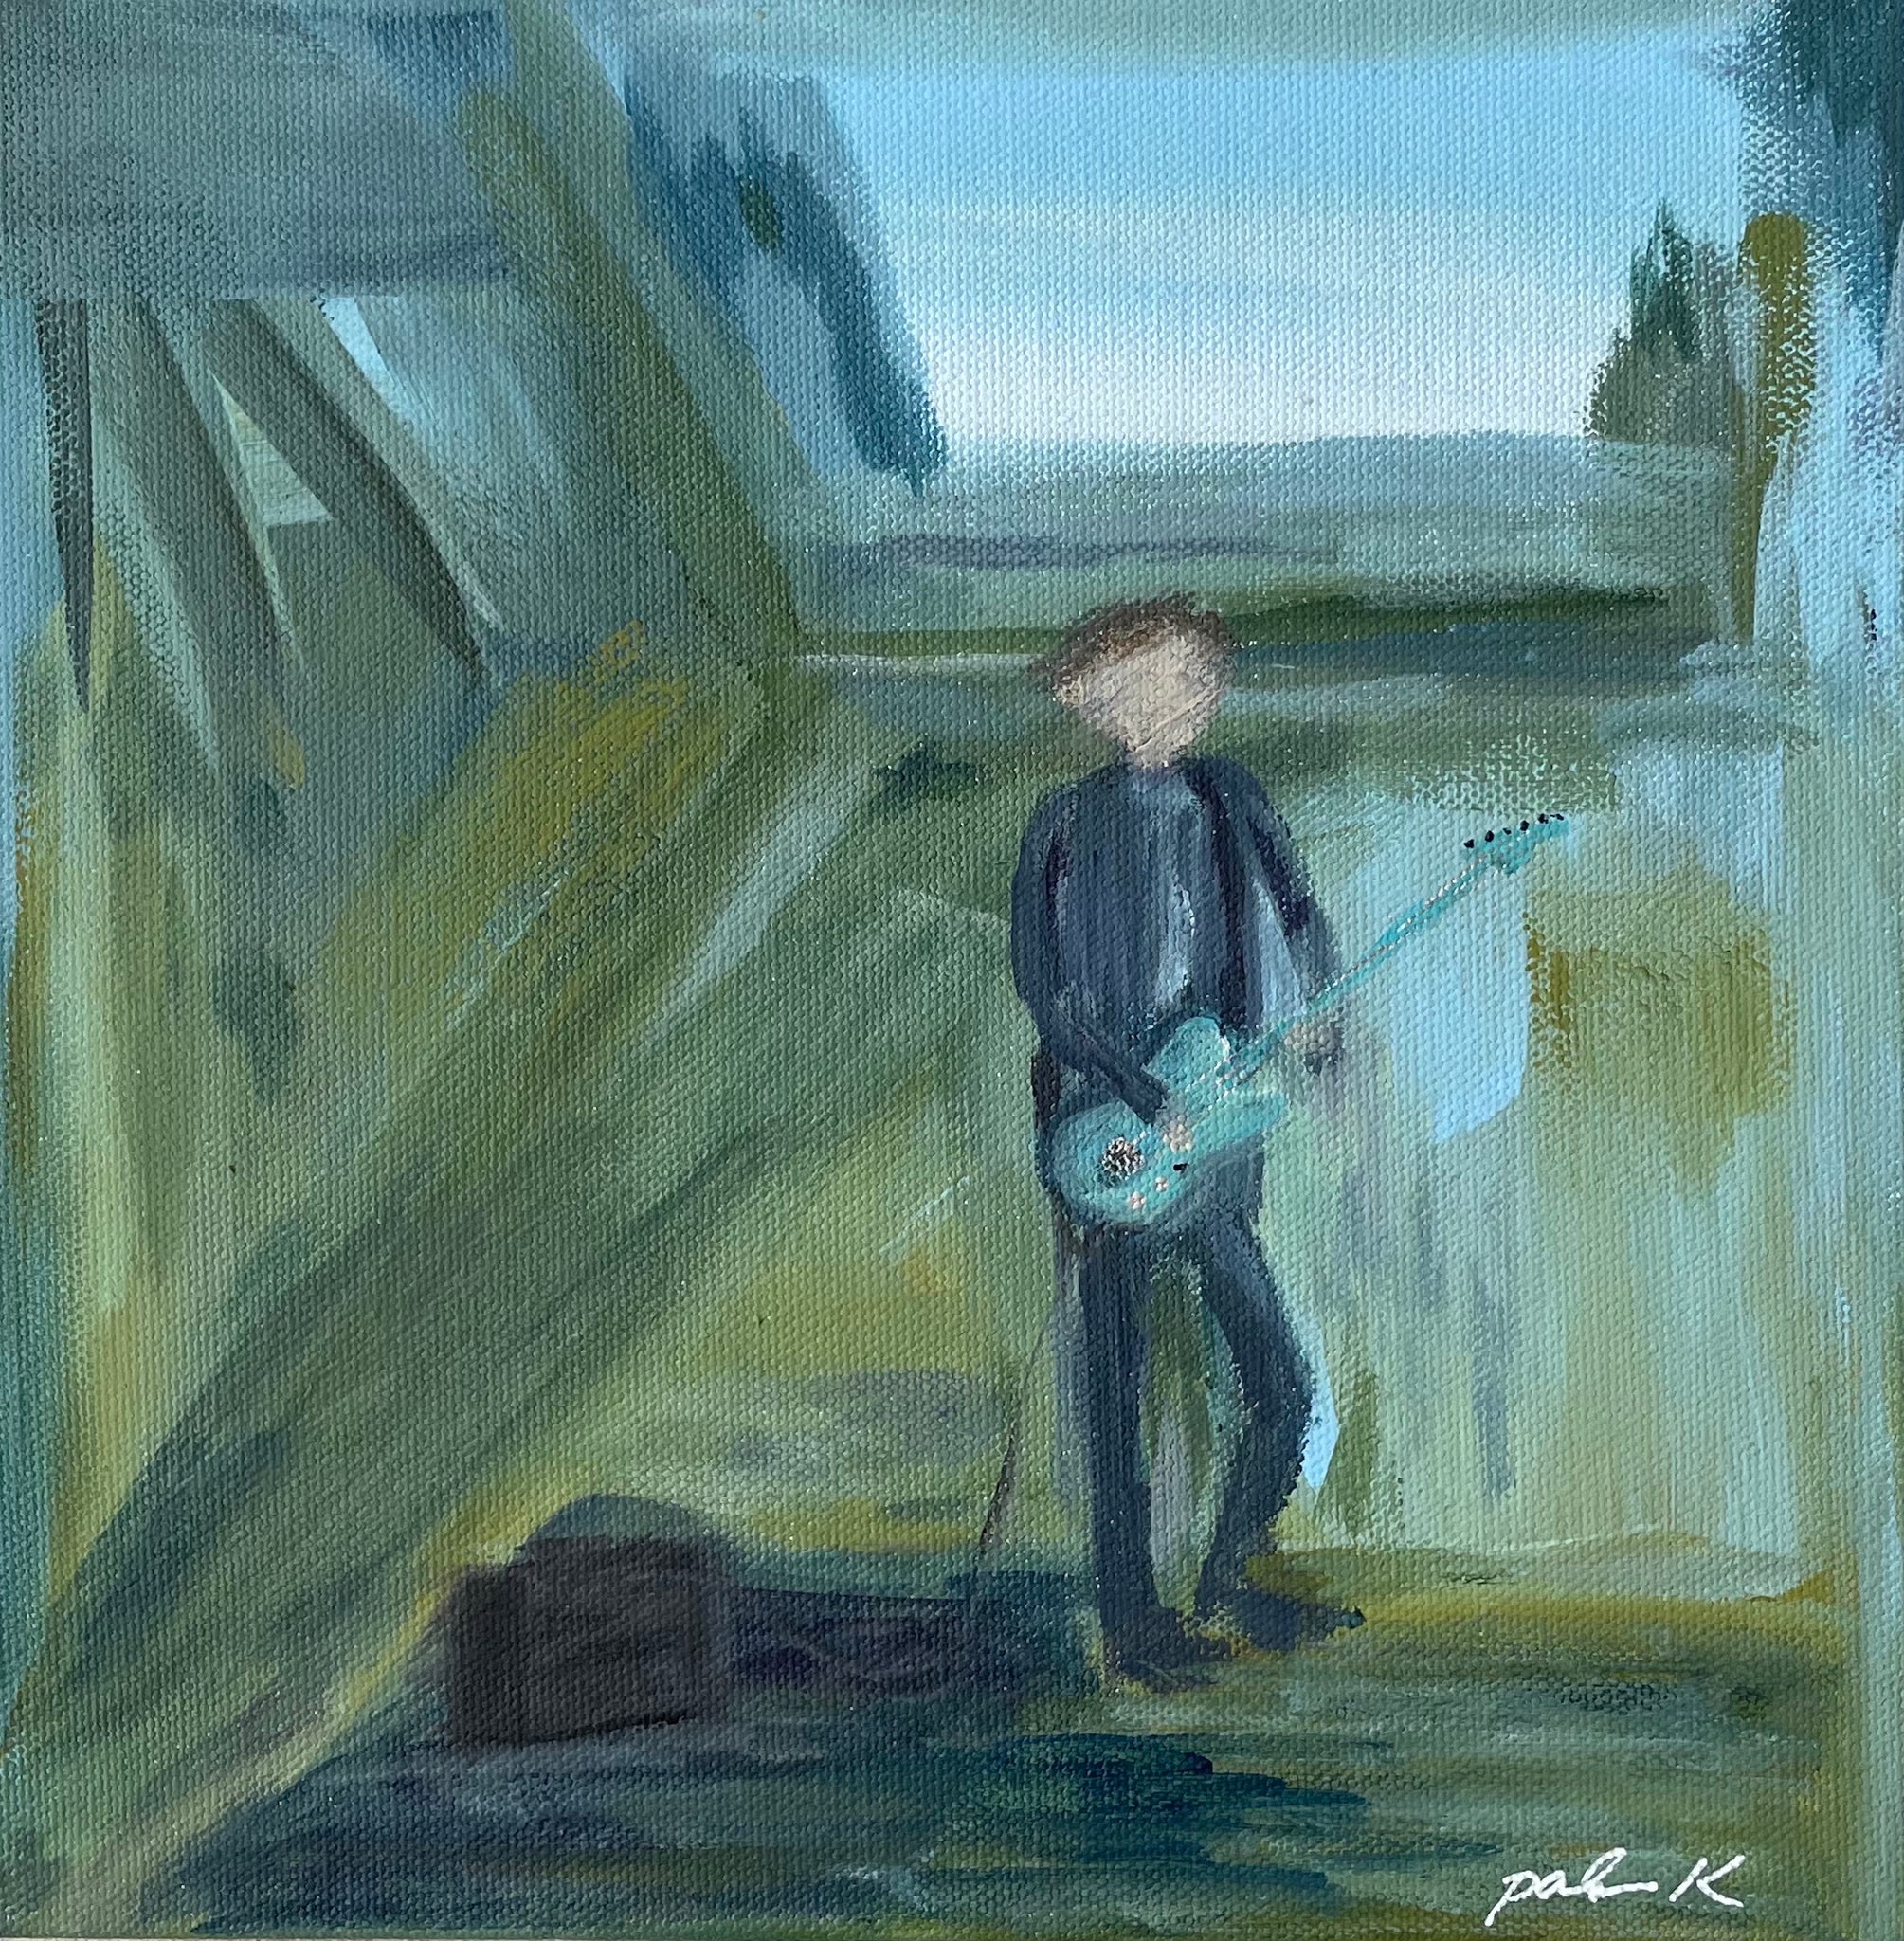 8 x 8 Fine Art Print of the painting "Suit and Tie"  An abstract impressionistic painting of a single Guitar Player standing and playing next to his amp.  Each print signed and titled on back.  Each print arrived in thick clear cellophane sleeve and flat shipped.